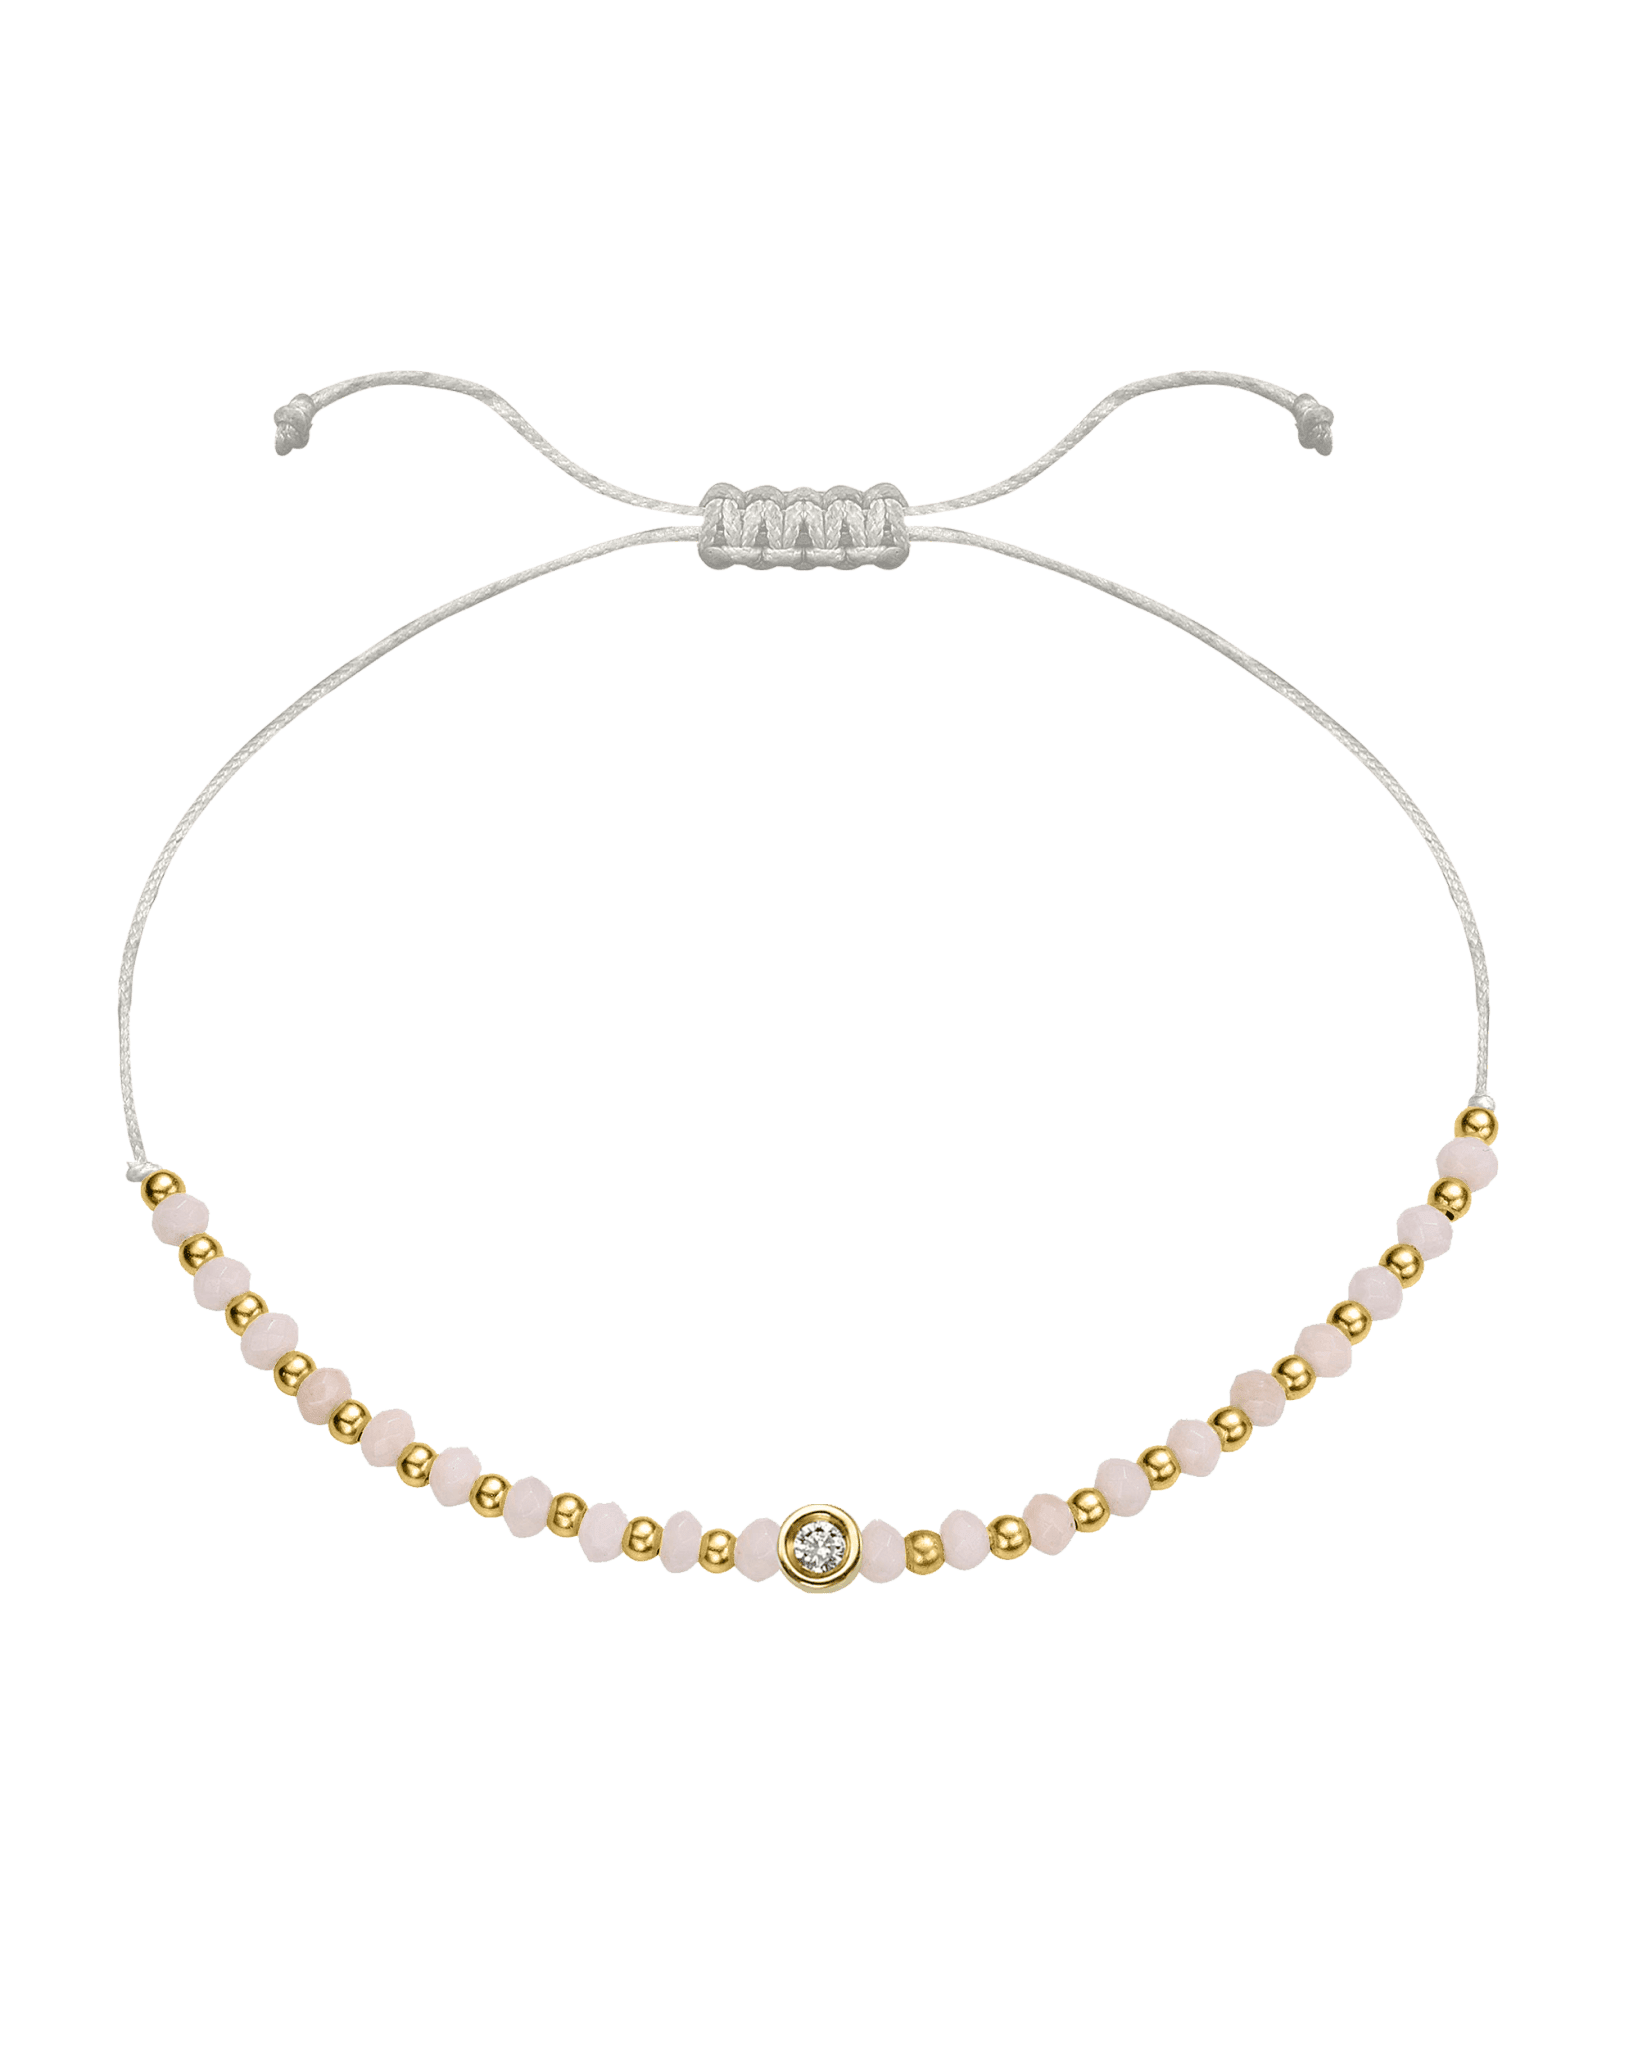 Rhodochrosite Gemstone String of Love Bracelet for Compassion - 14K Yellow Gold Bracelet 14K Solid Gold Pearl Small: 0.03ct 